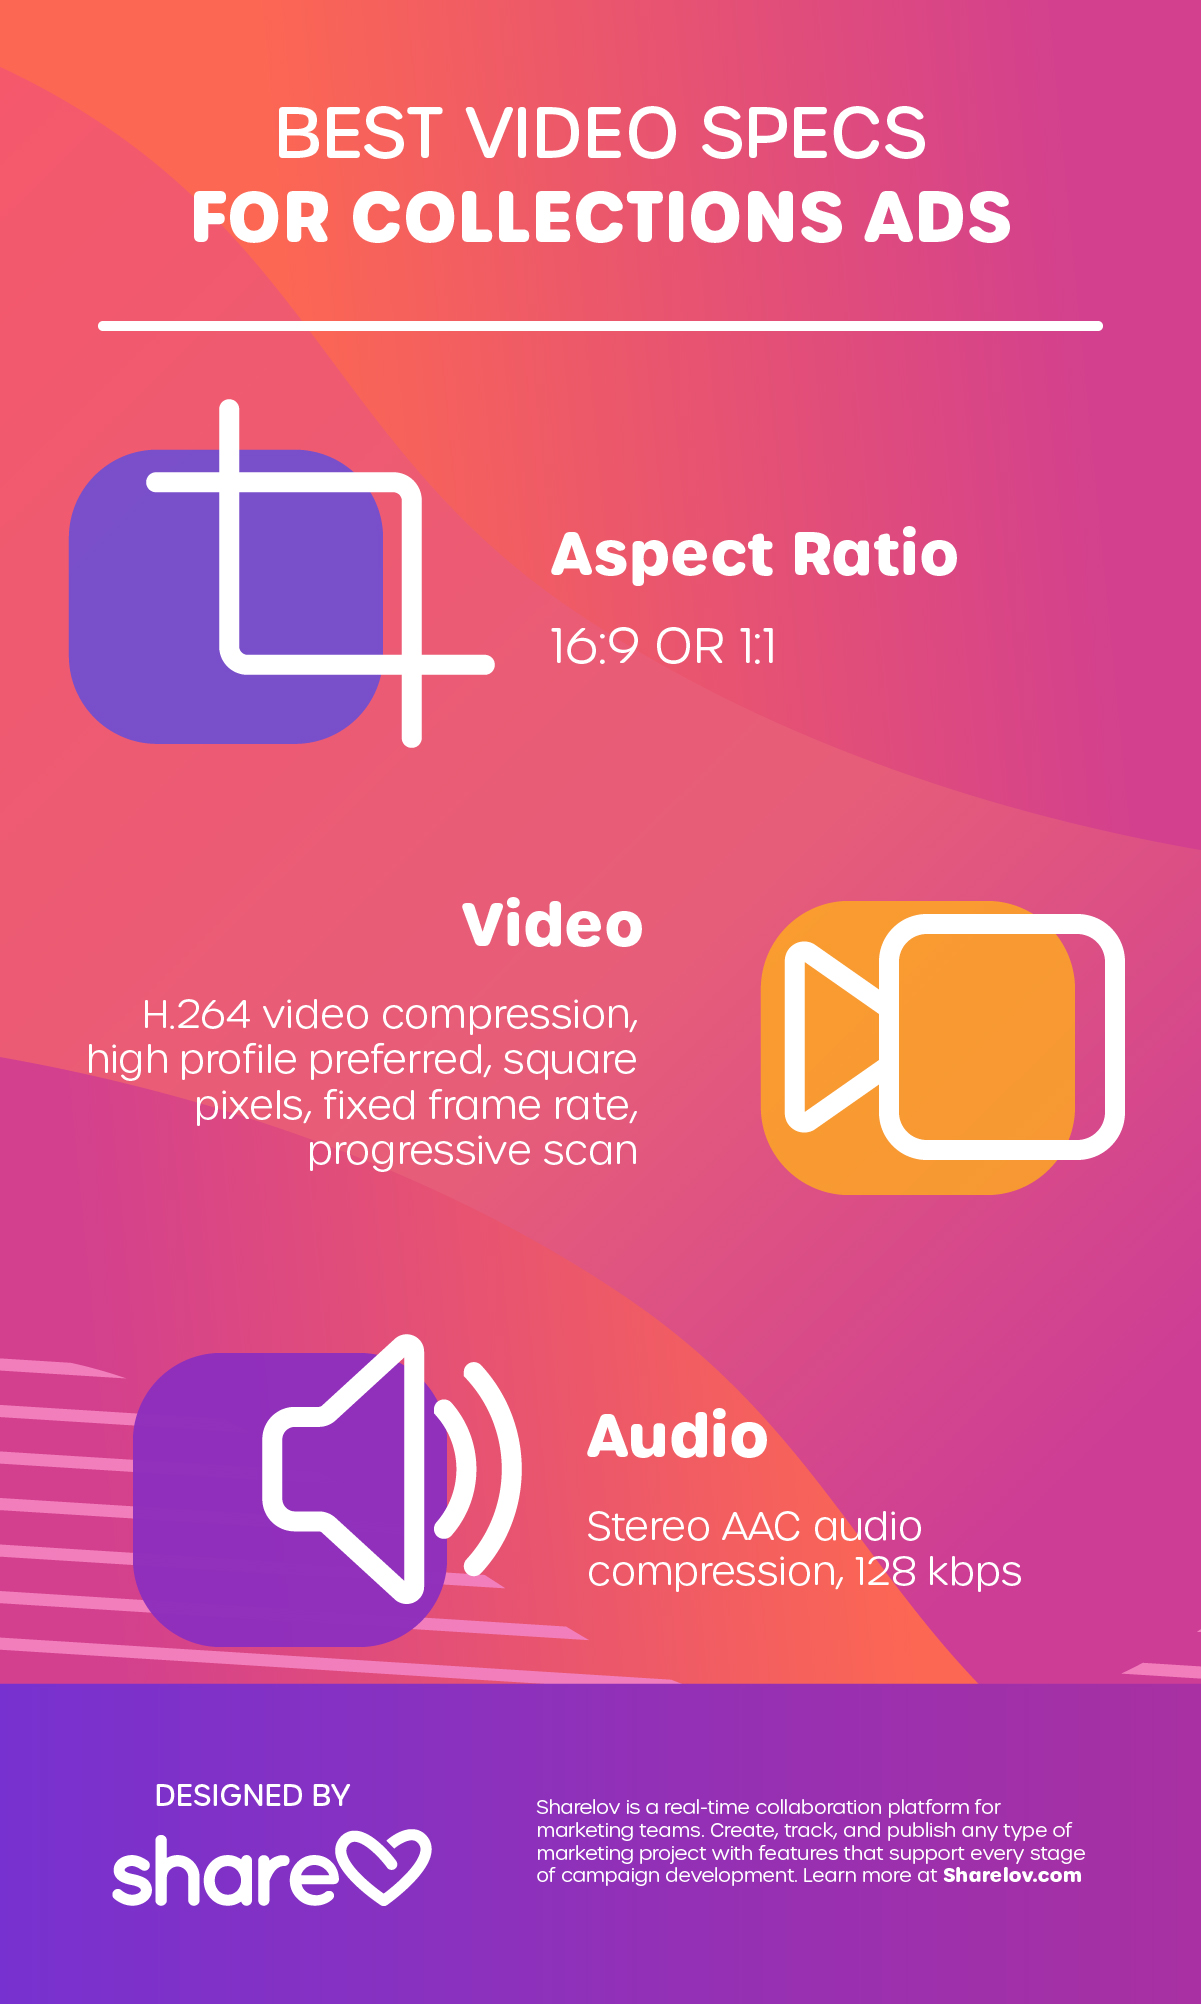 Best Video Specs for Collections Ads instagram